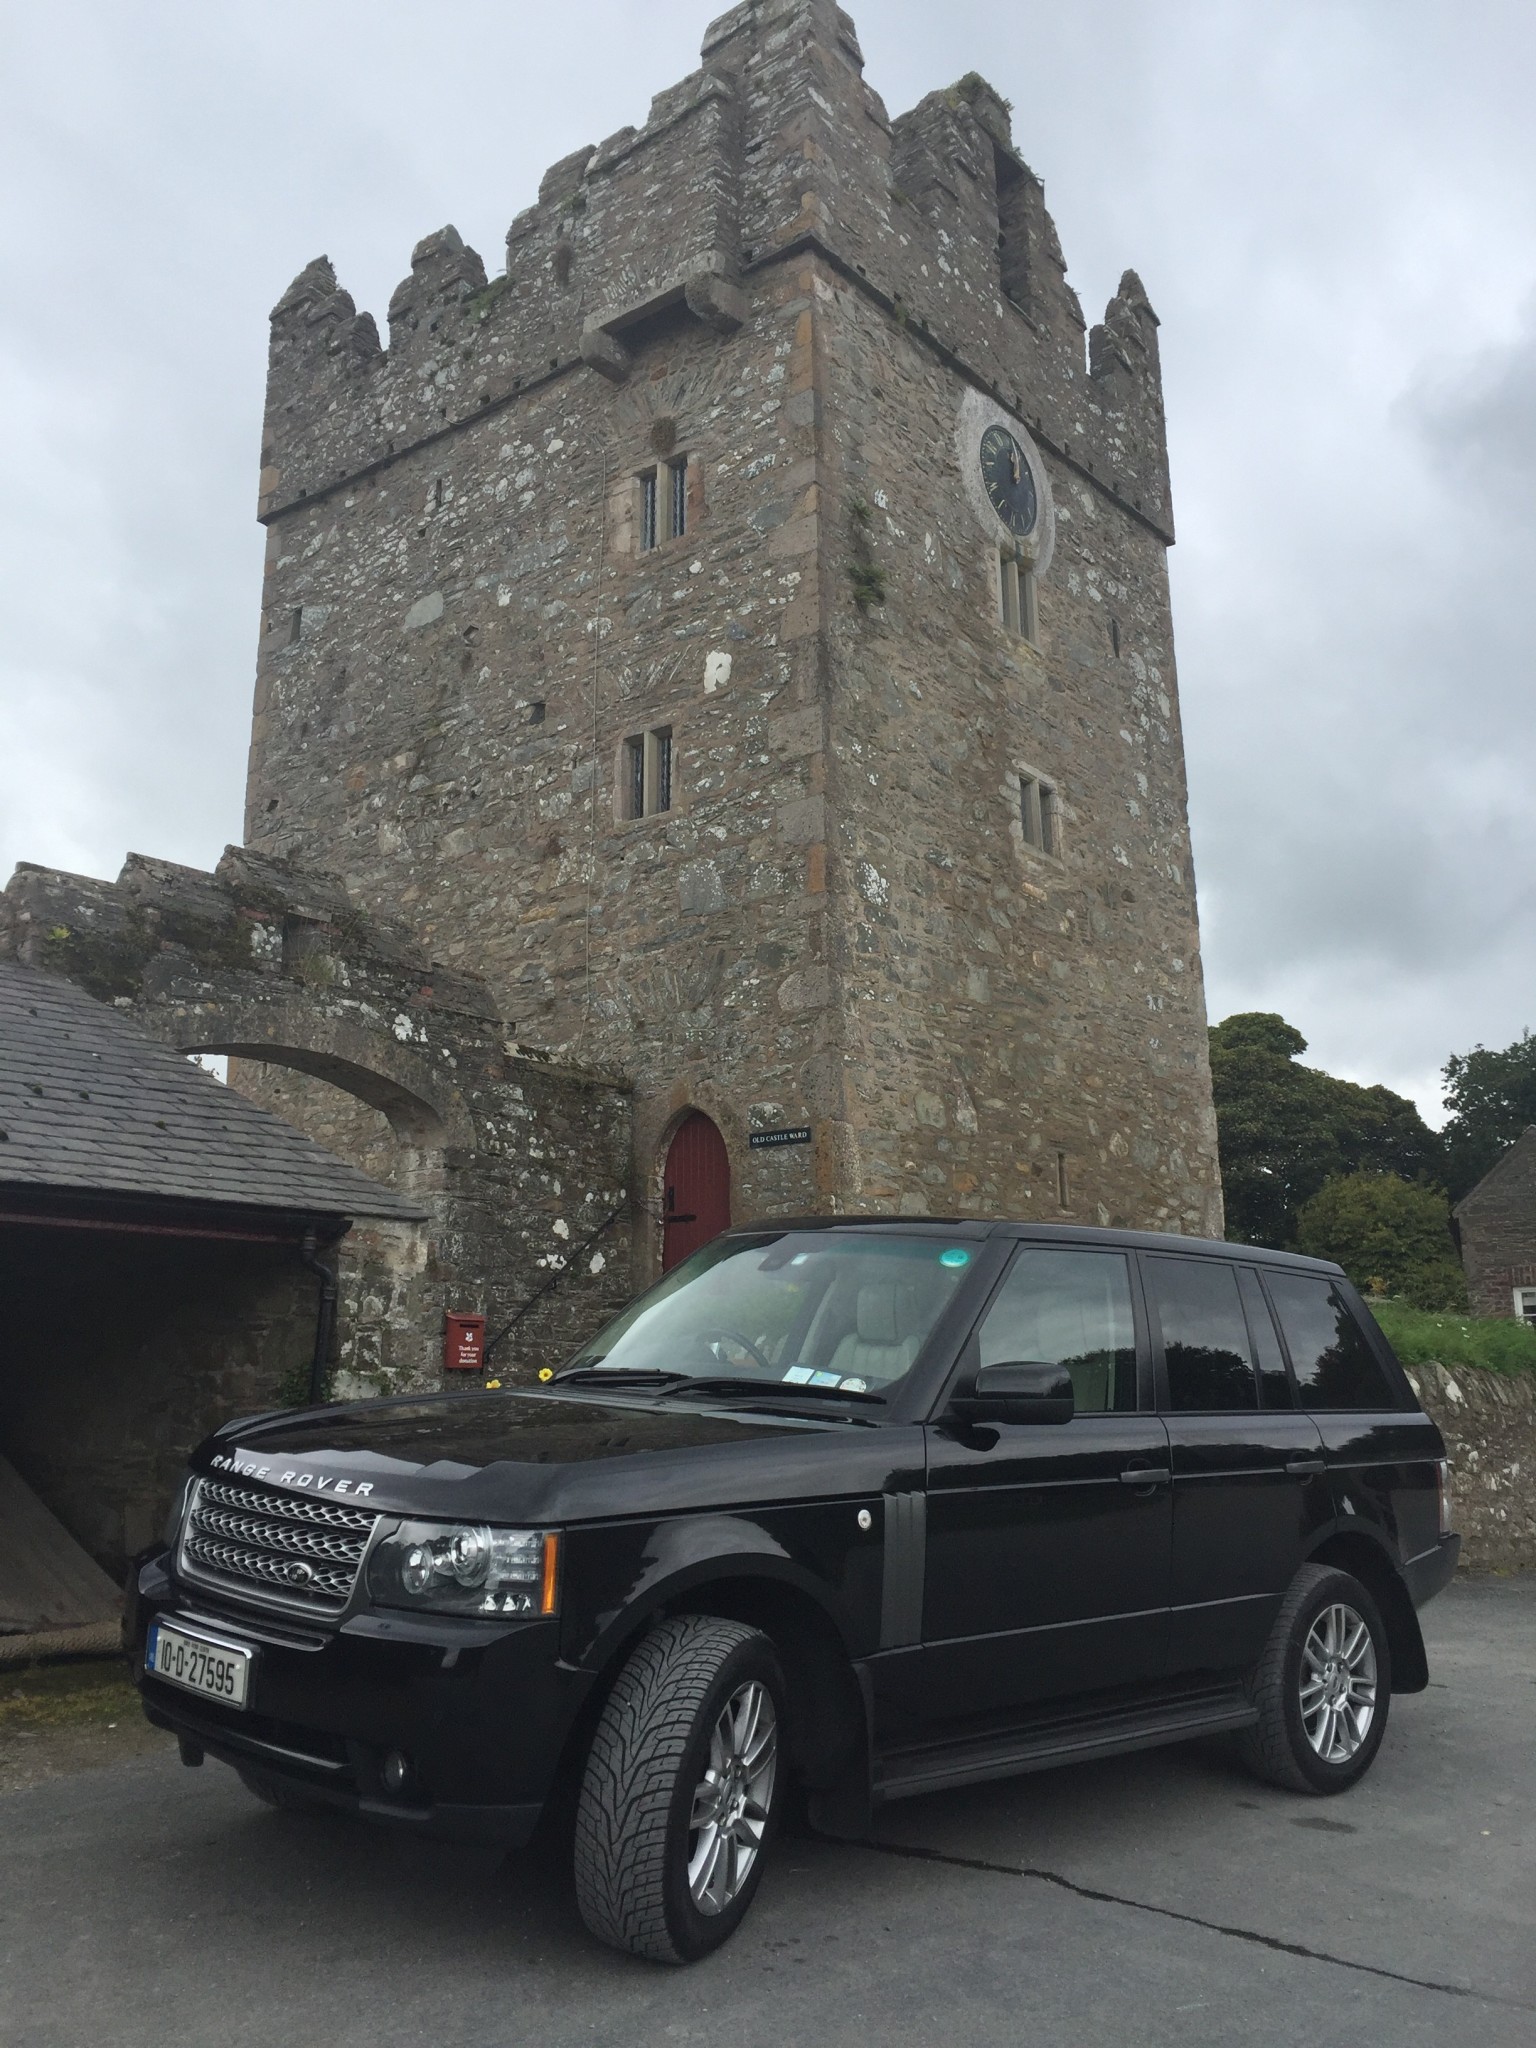 Advantages of a Private Tour in Ireland